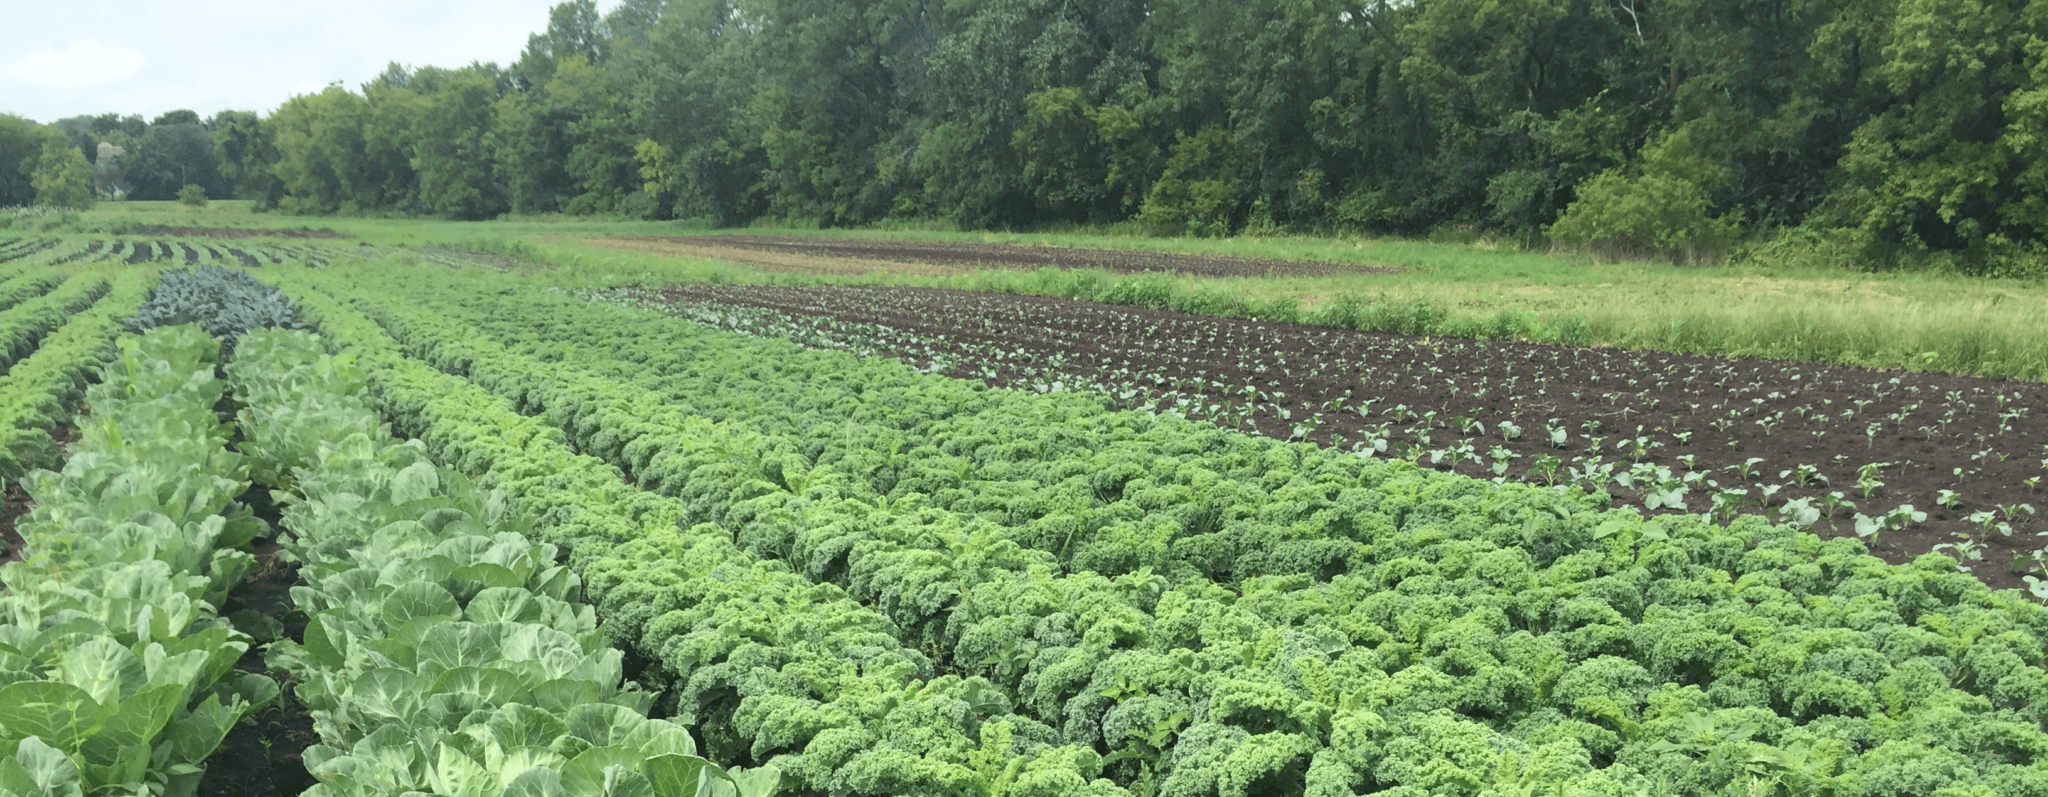 Field with Kale